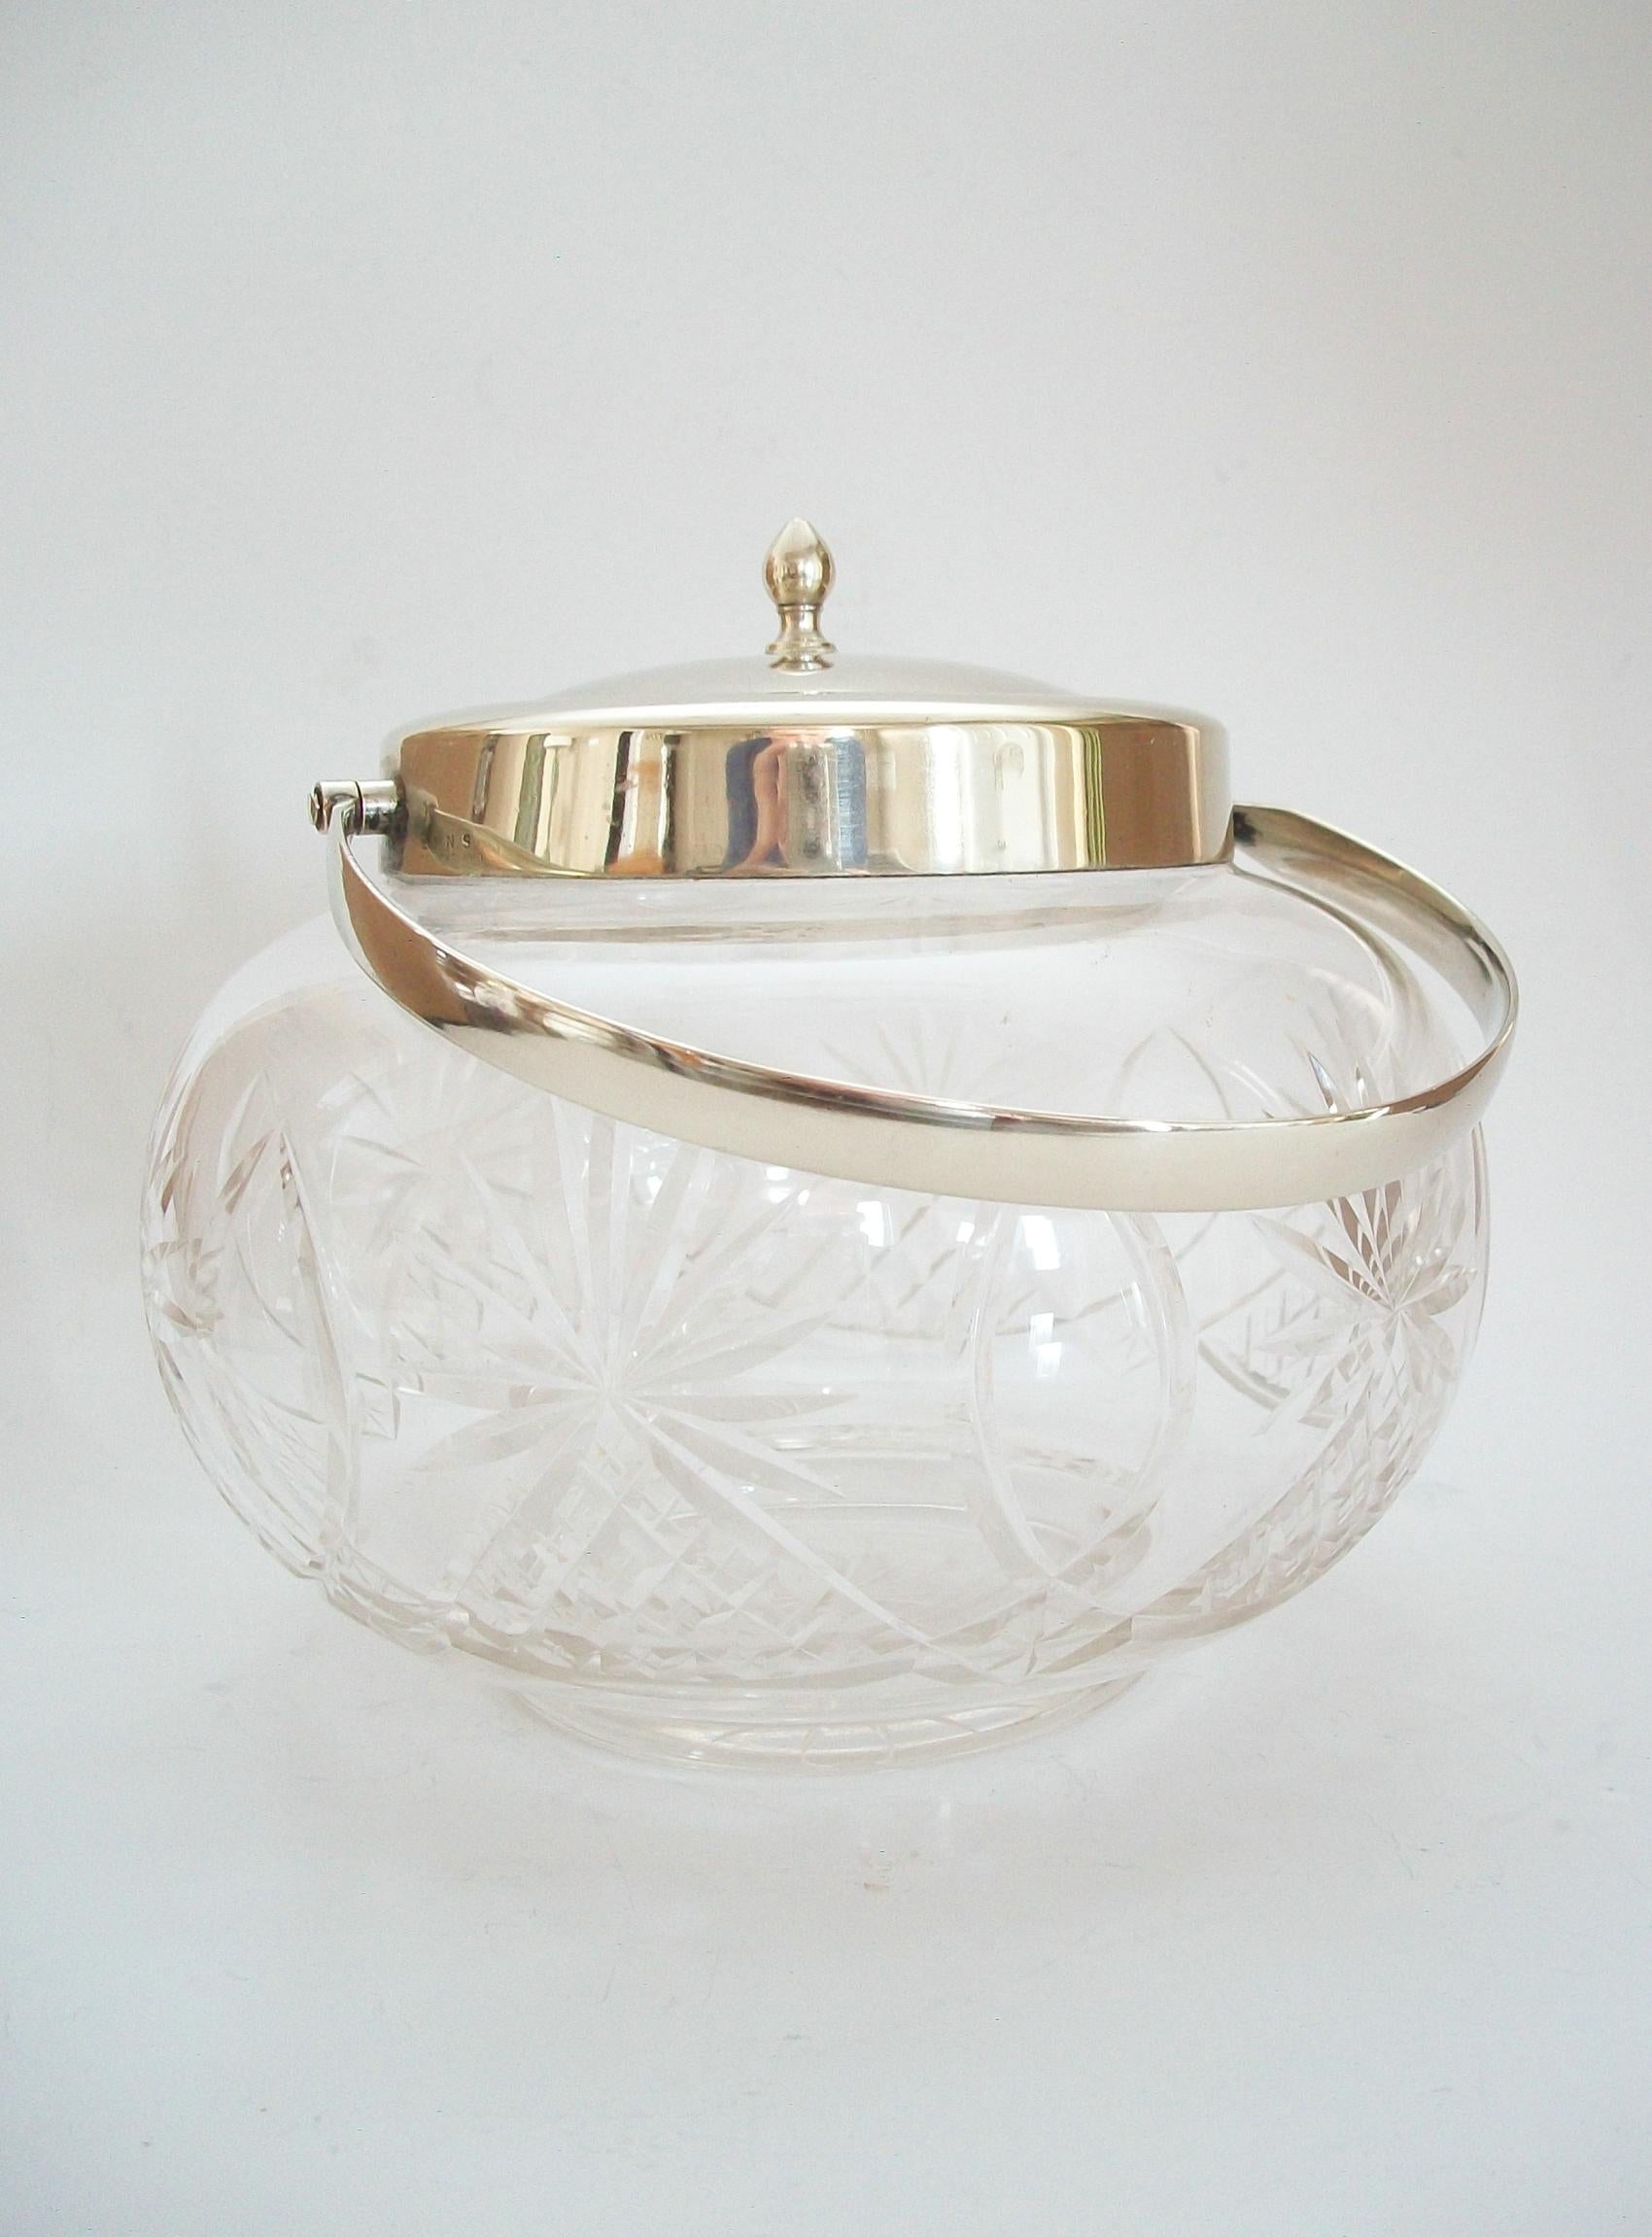 Cut Crystal & Silverplate Biscuit Barrel - United Kingdom - Early 20th Century For Sale 1